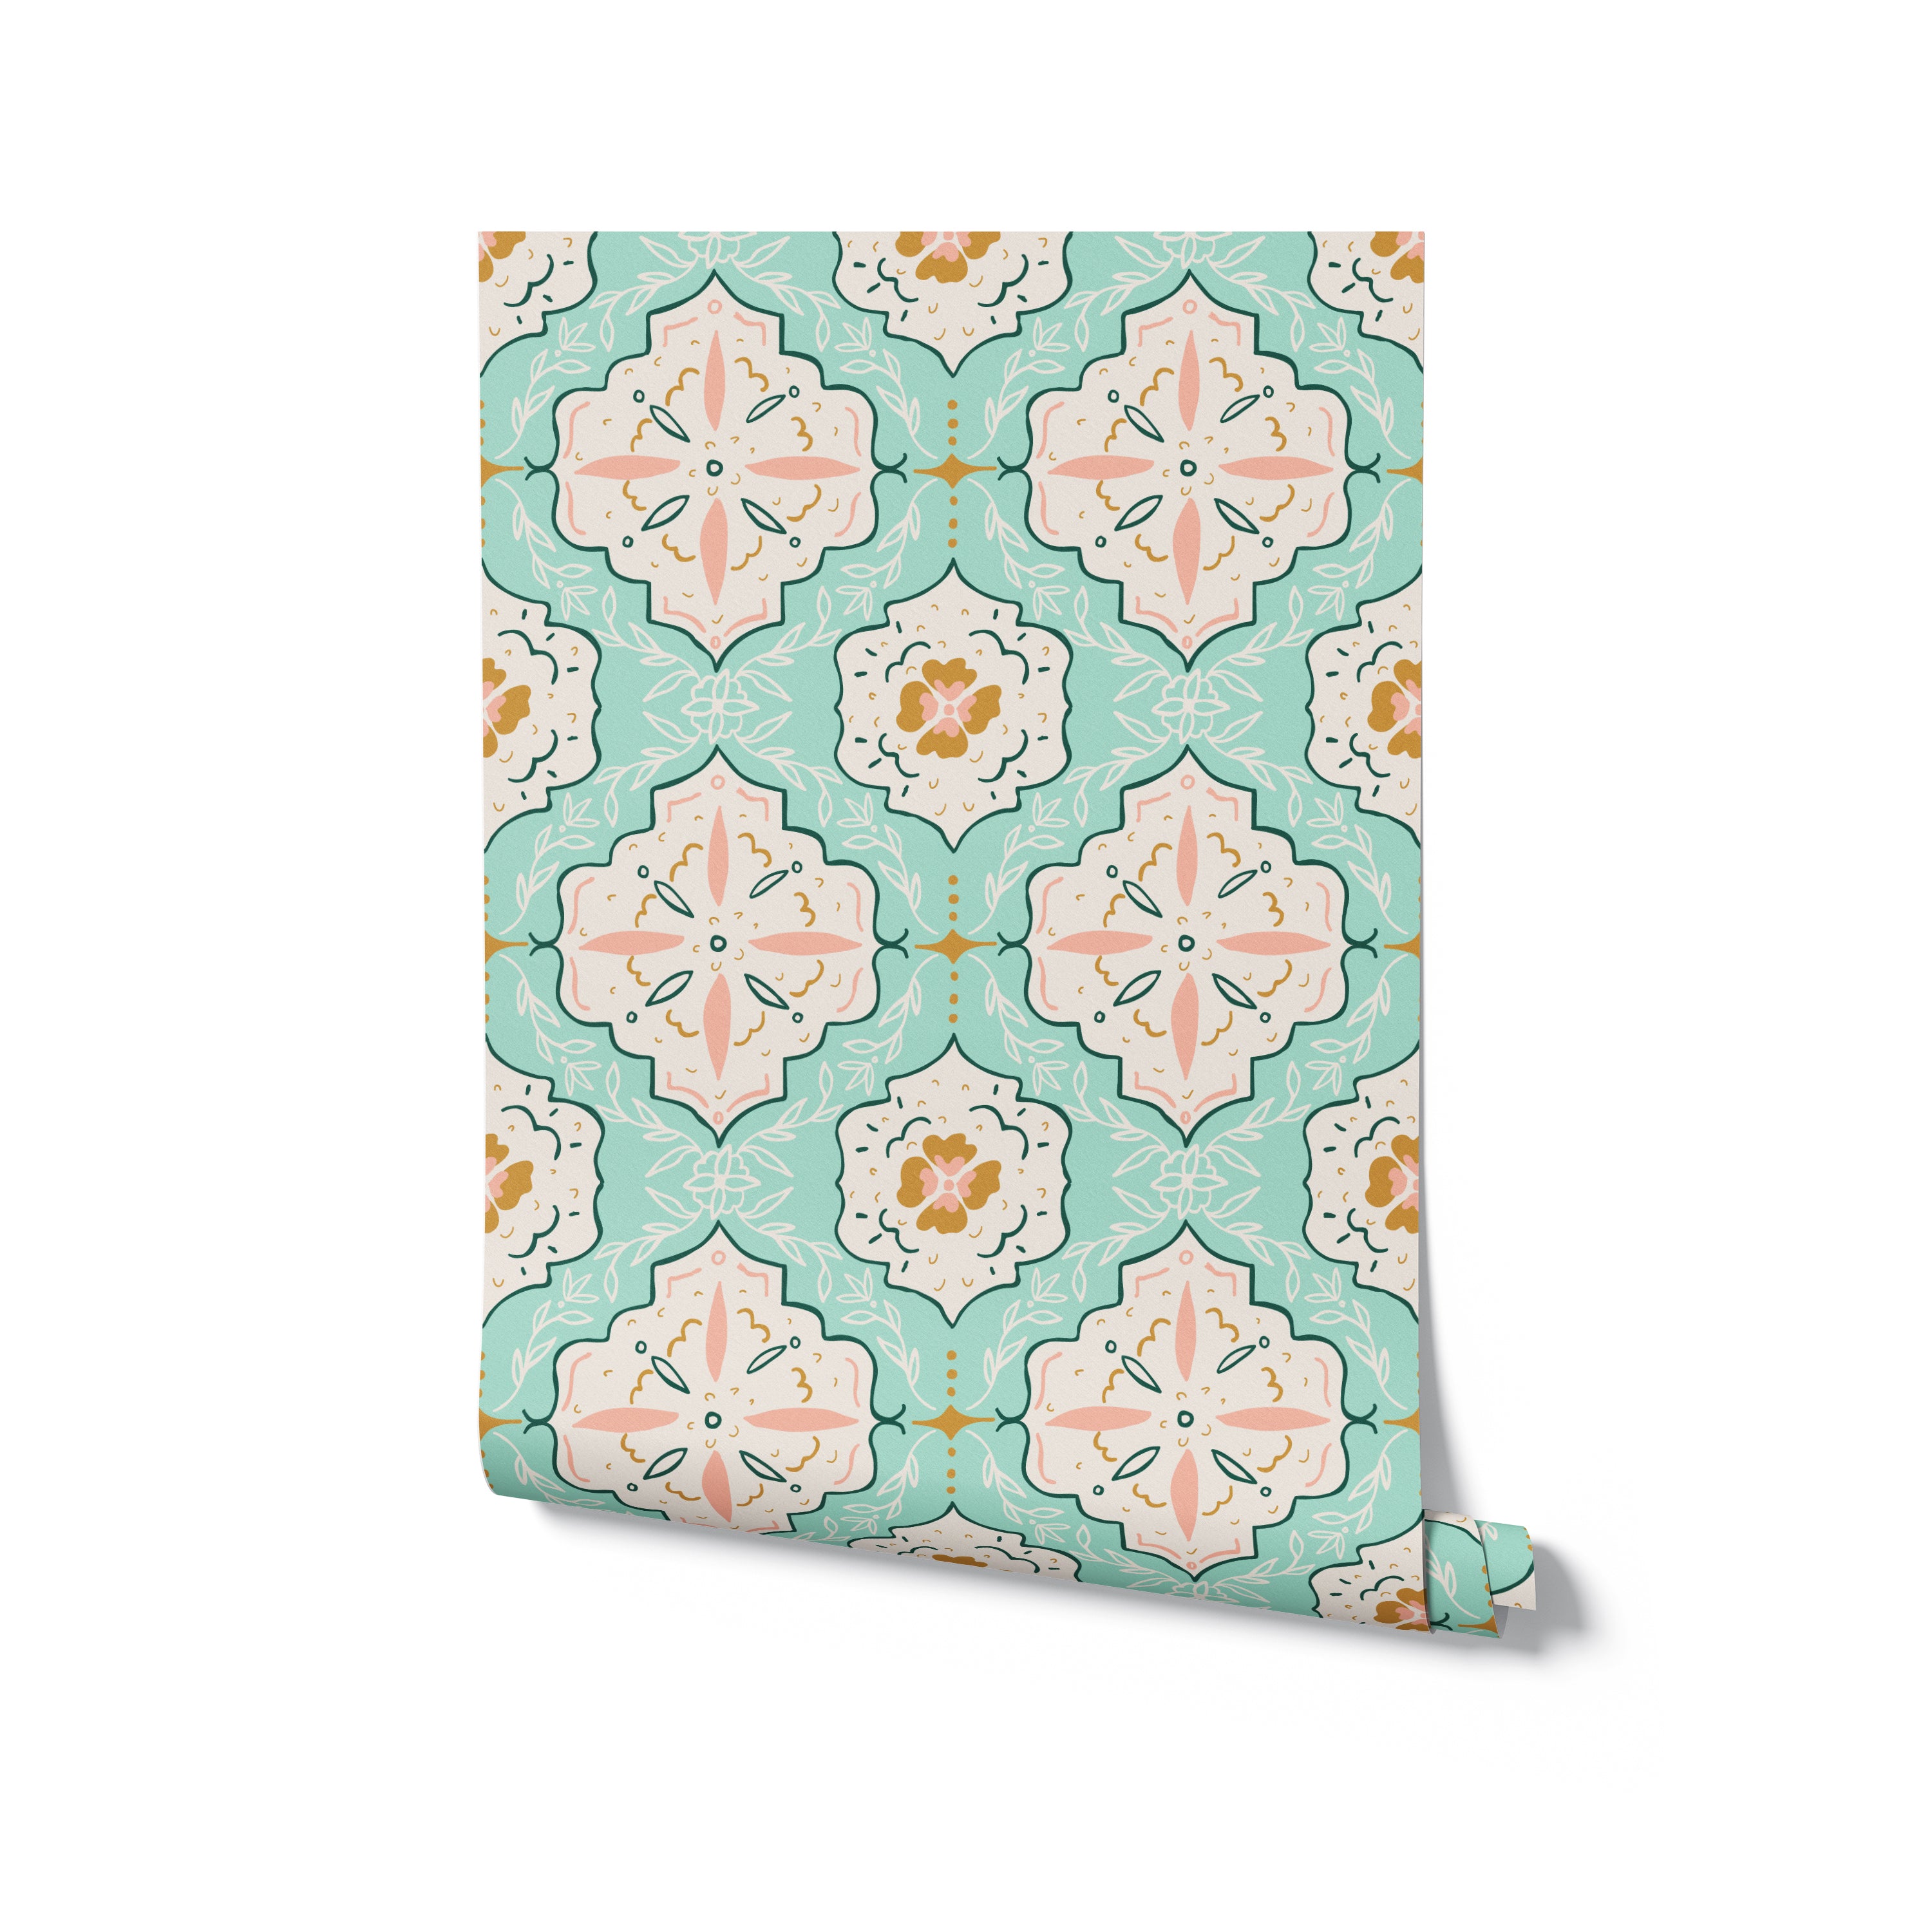 Roll of Fatima Tile Wallpaper showing ornate Moroccan-inspired floral and geometric patterns in shades of turquoise, white, peach, and mustard.